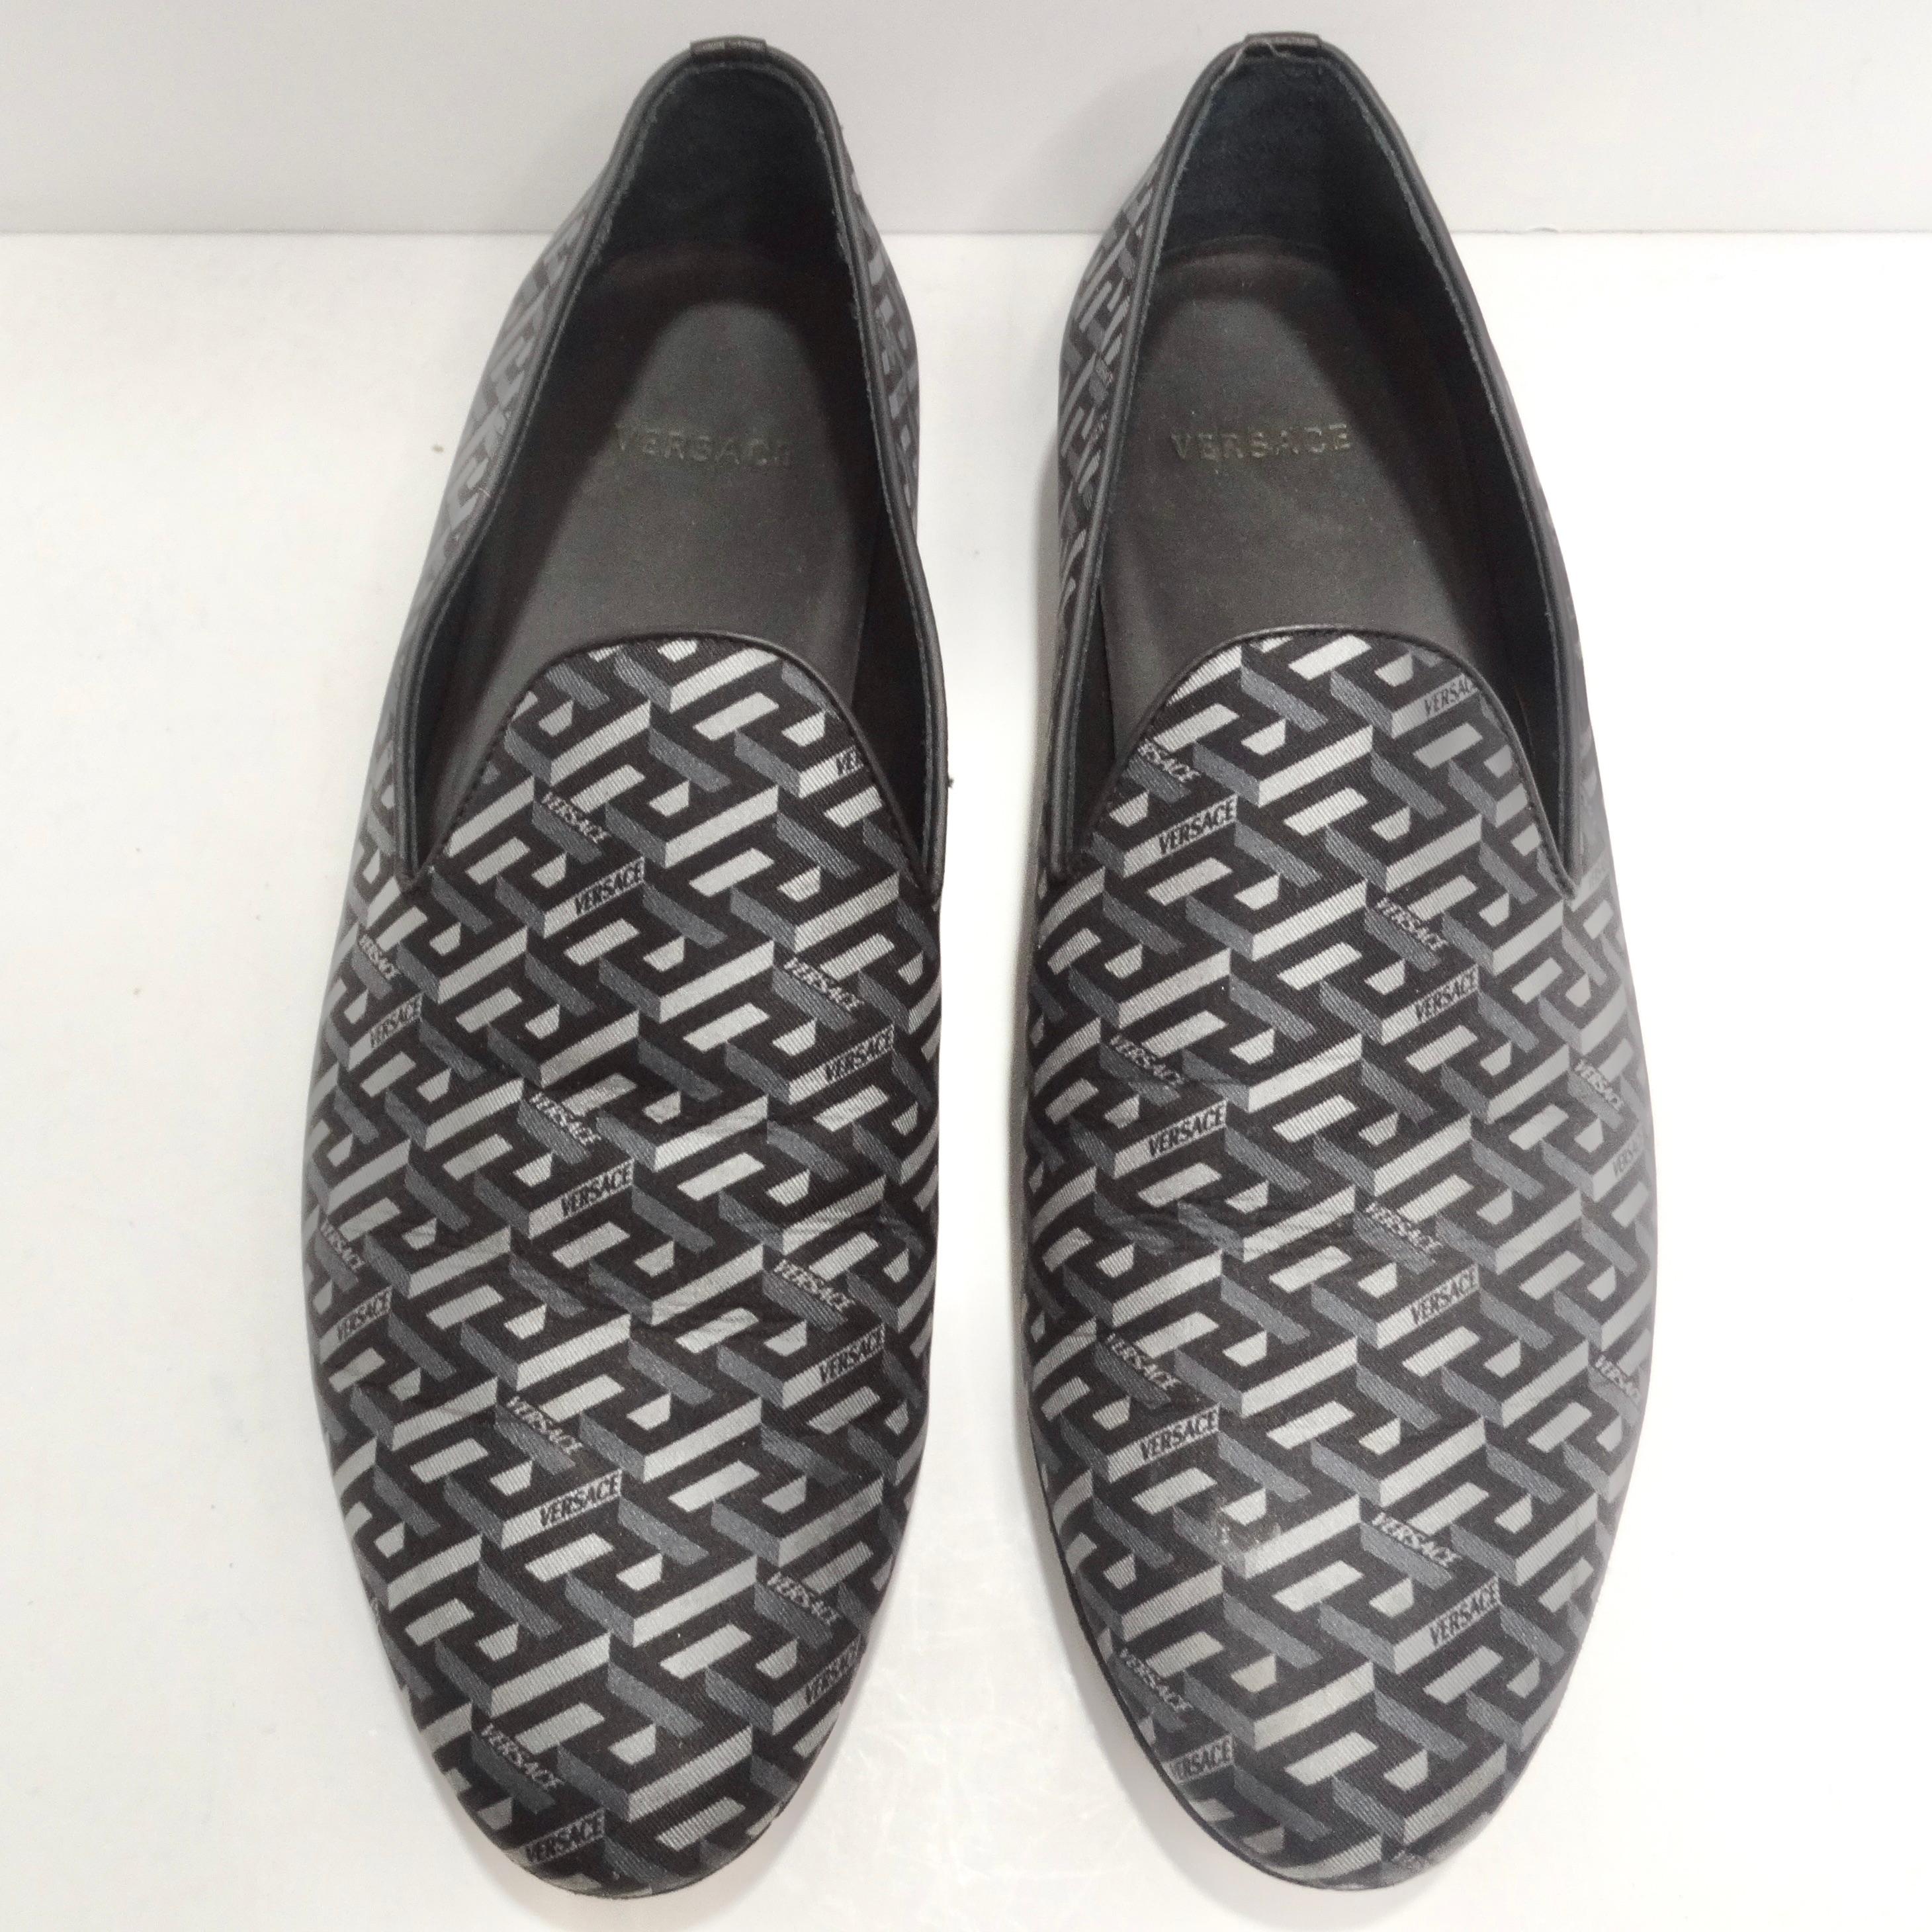 Introducing the Versace La Greca Jacquard Loafers—a pair of sleek slippers that seamlessly blend classic style with a bold Versace touch. These loafers aren't just shoes; they are a statement of timeless sophistication and the unmistakable flair of